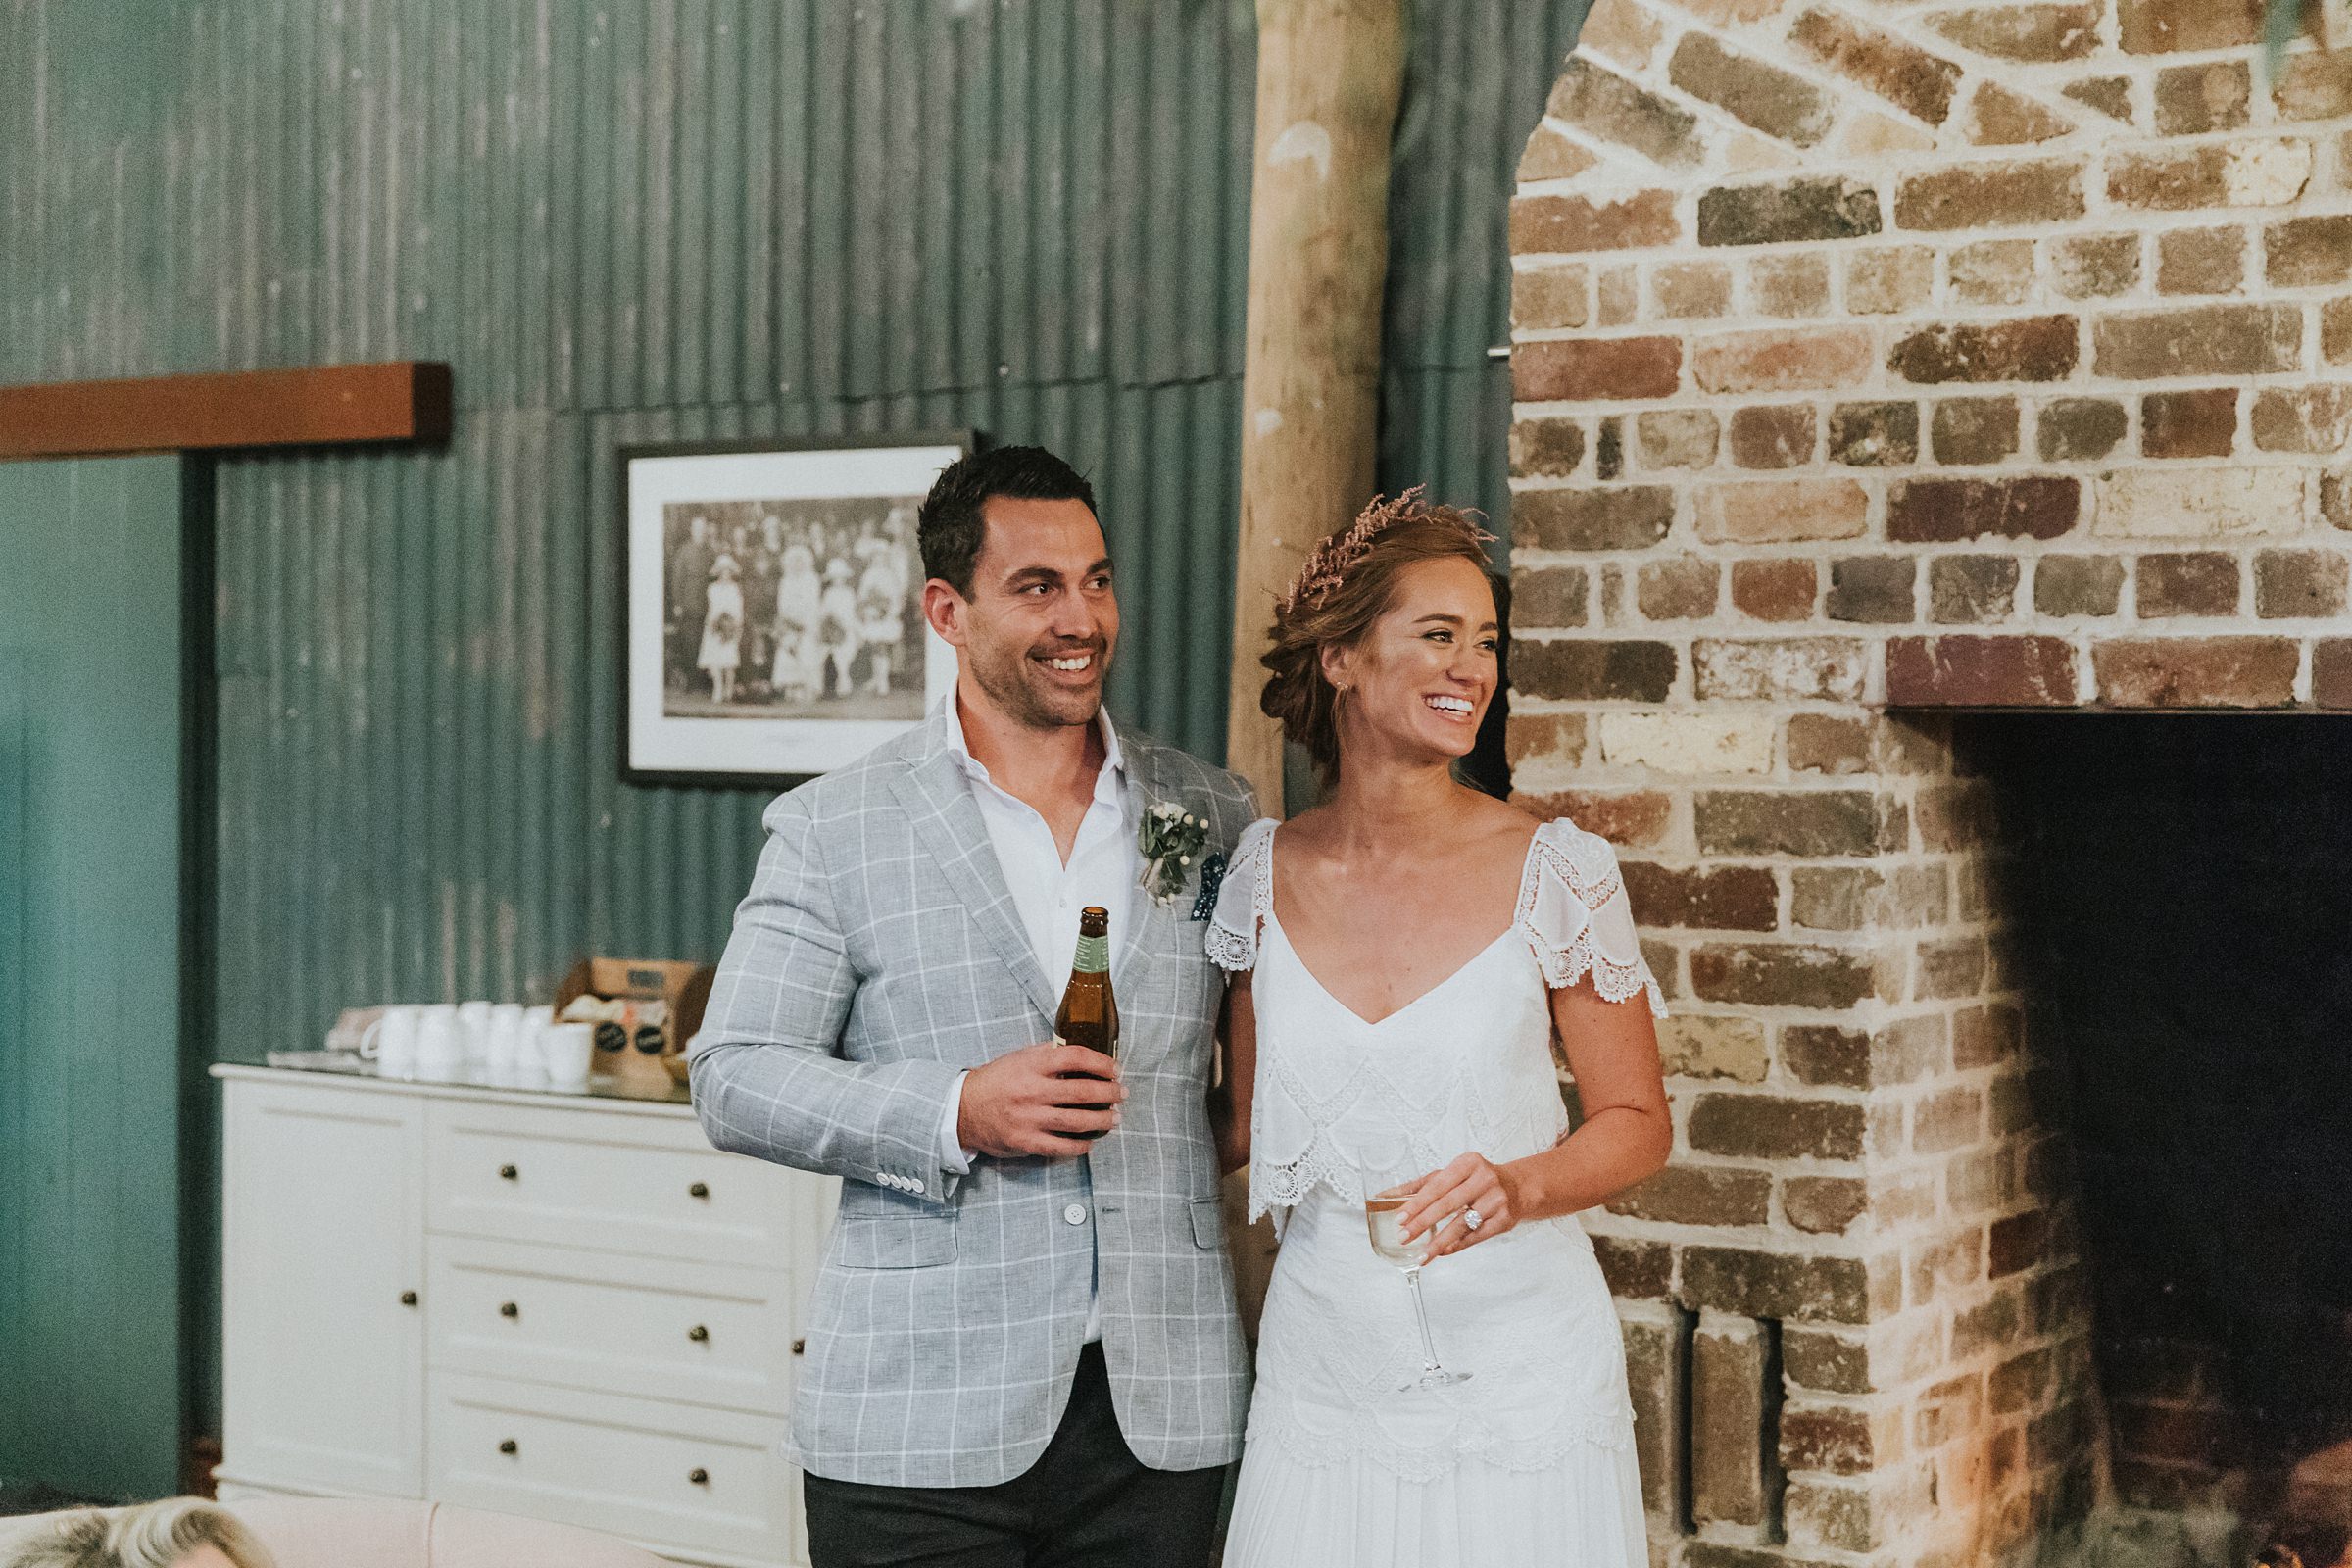 special smiles for the bride and groom at mali brae farm